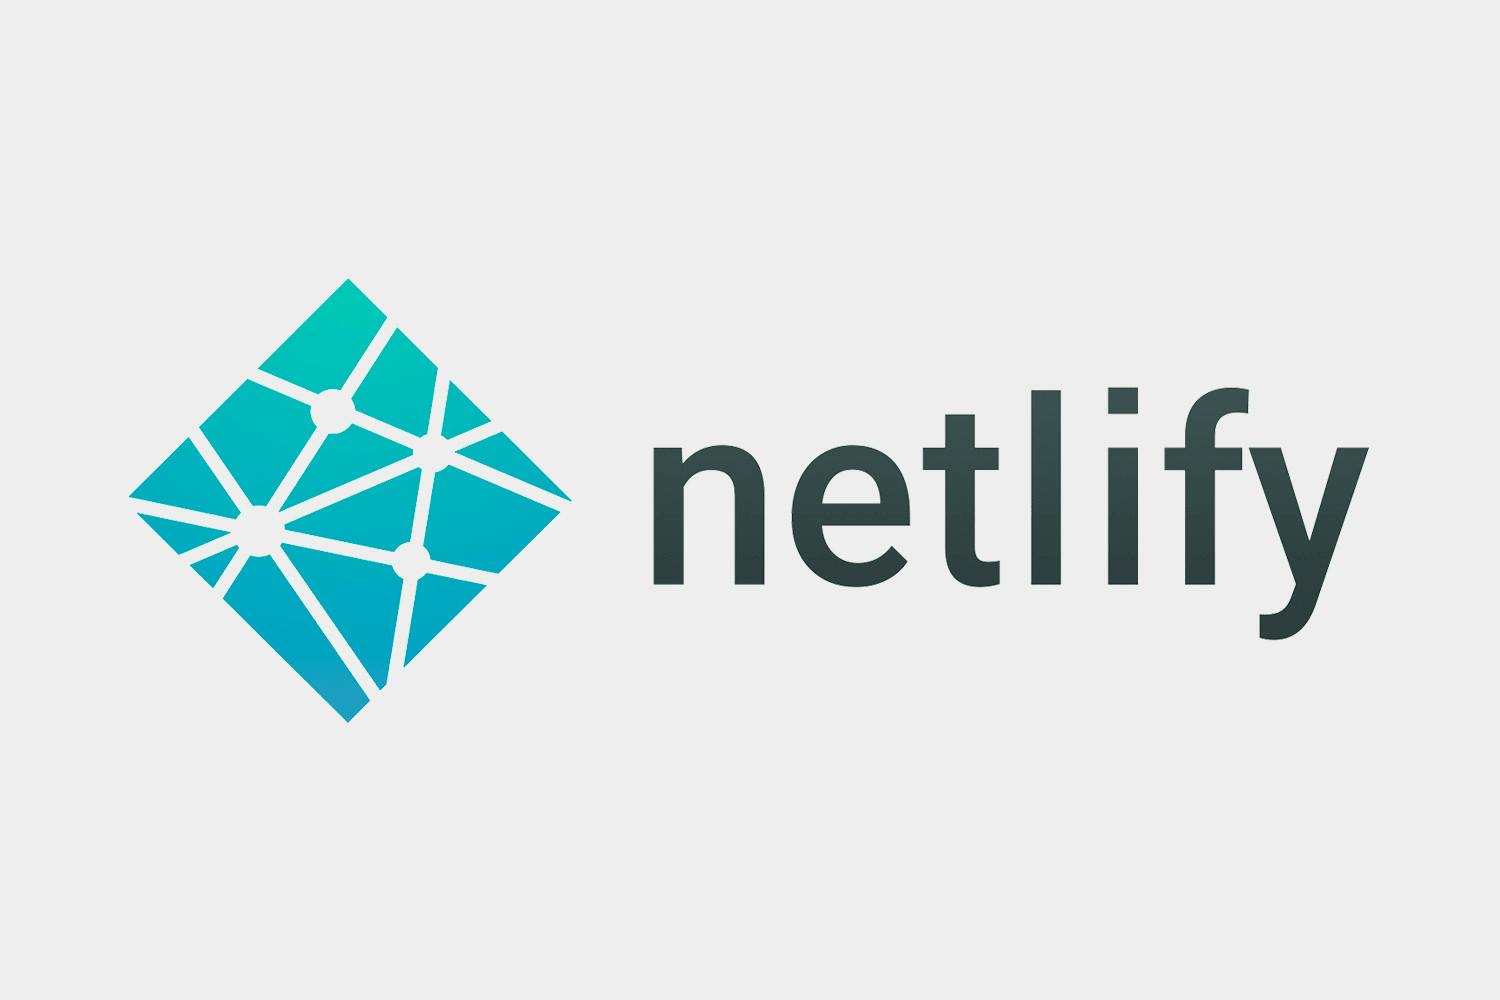 Host your websites on Netlify for free